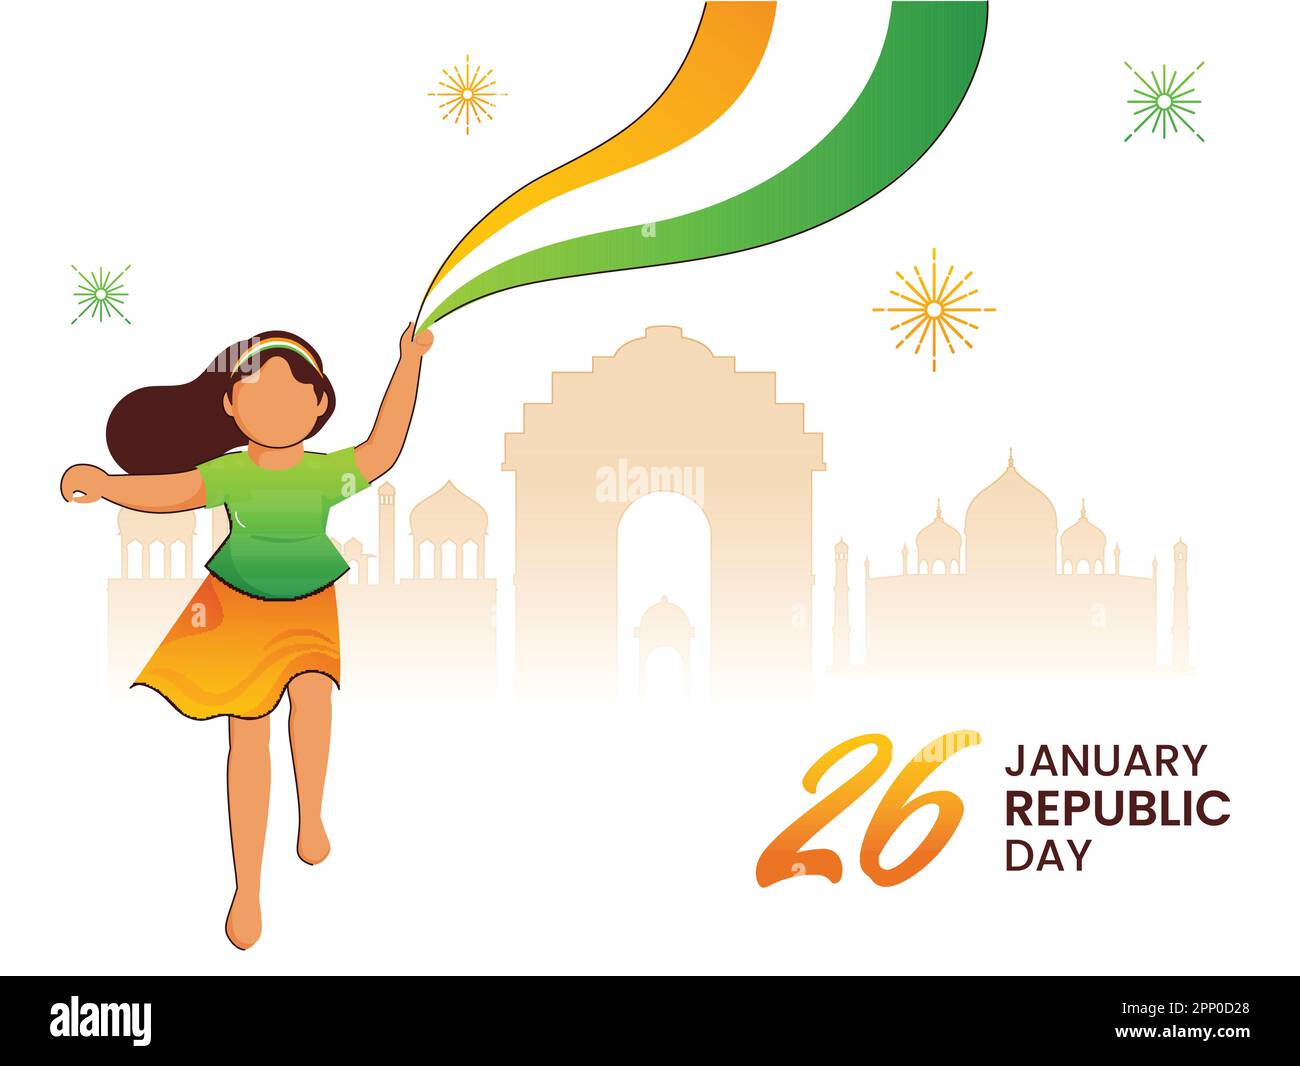 26th January Republic Day Font With Faceless Girl Carrying Tricolor Wavy Ribbon And Silhouette India Famous Monuments On White Background. Stock Vector